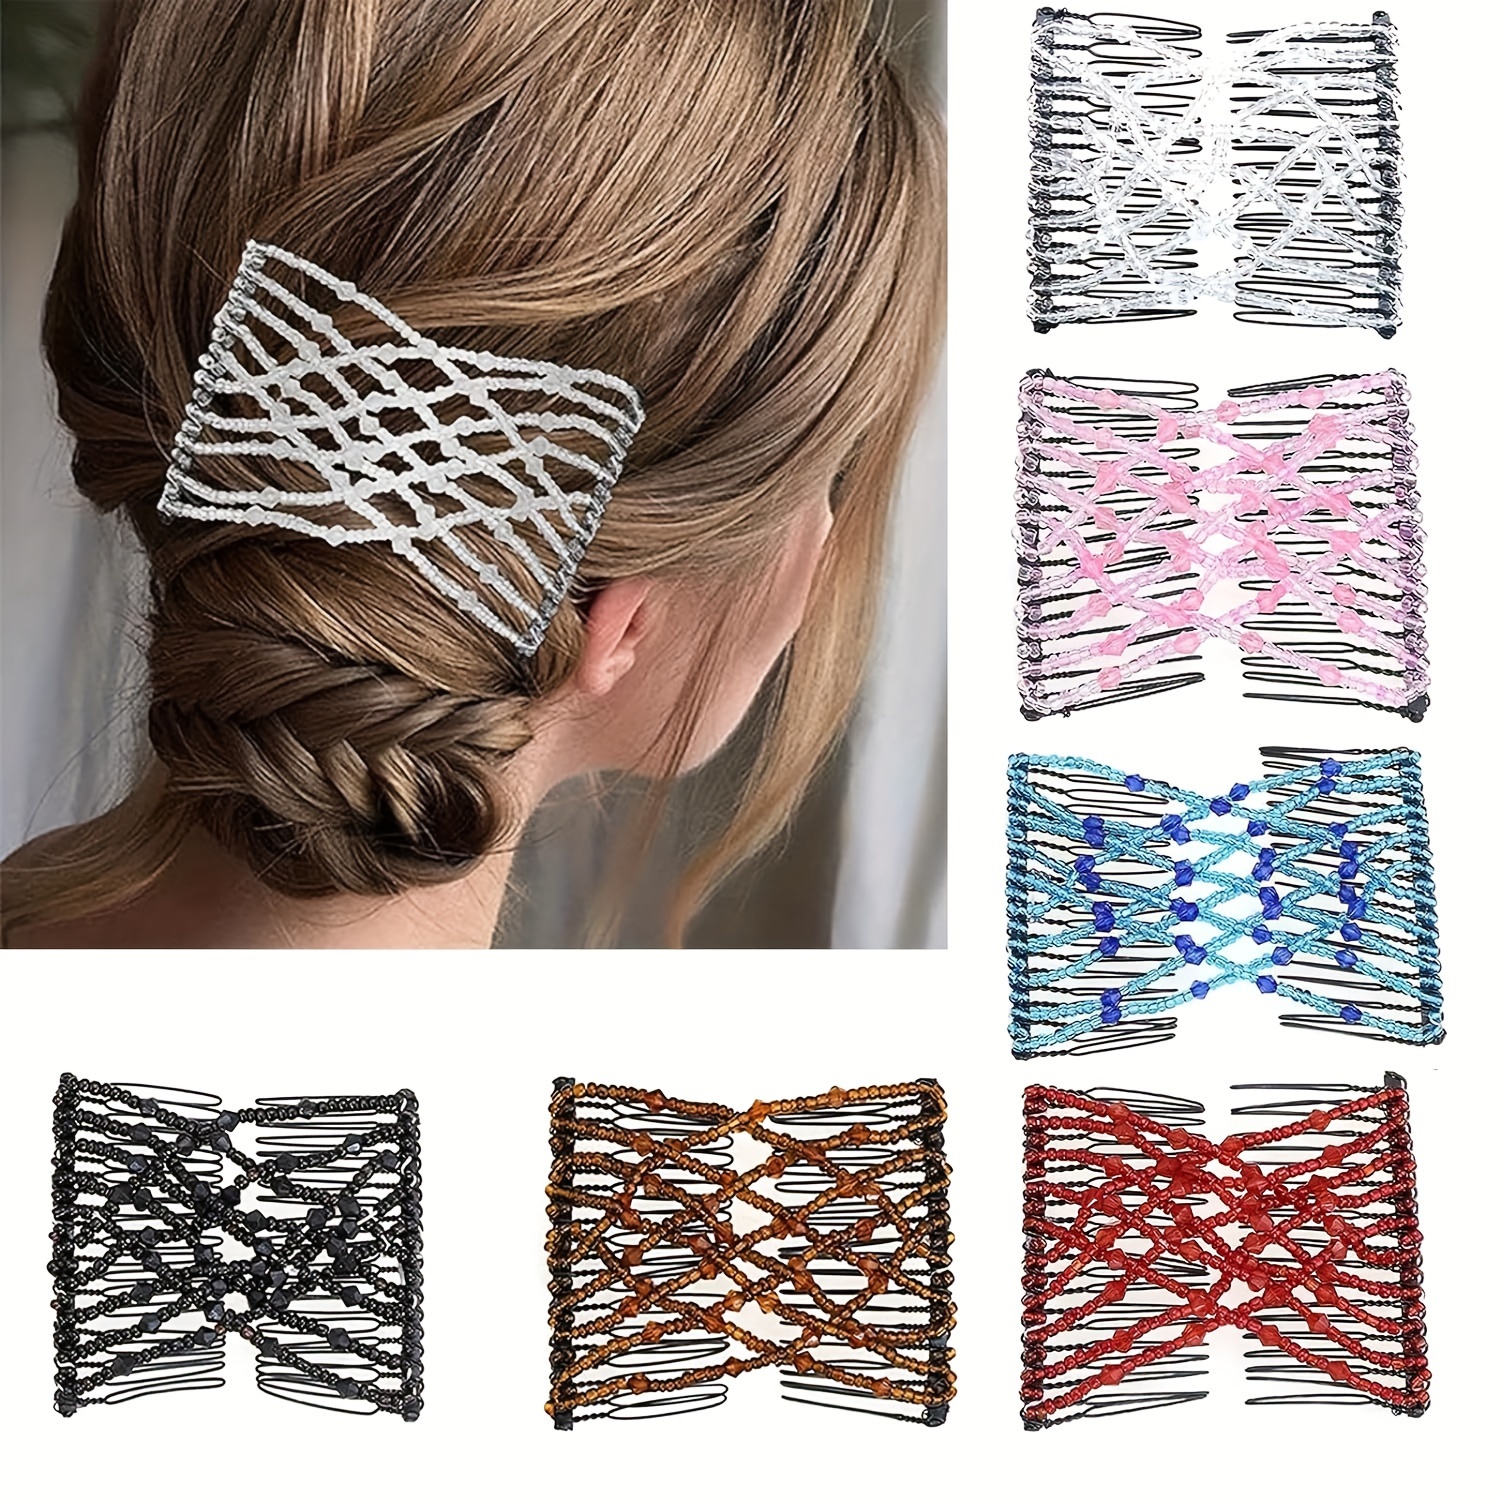 6pcs/set Barber Hair Grippers Magic Hair Stickers Tape Hairpins Hair Accessories for Hair Styling Sectioning and Coloring, Hairdressing Supplies